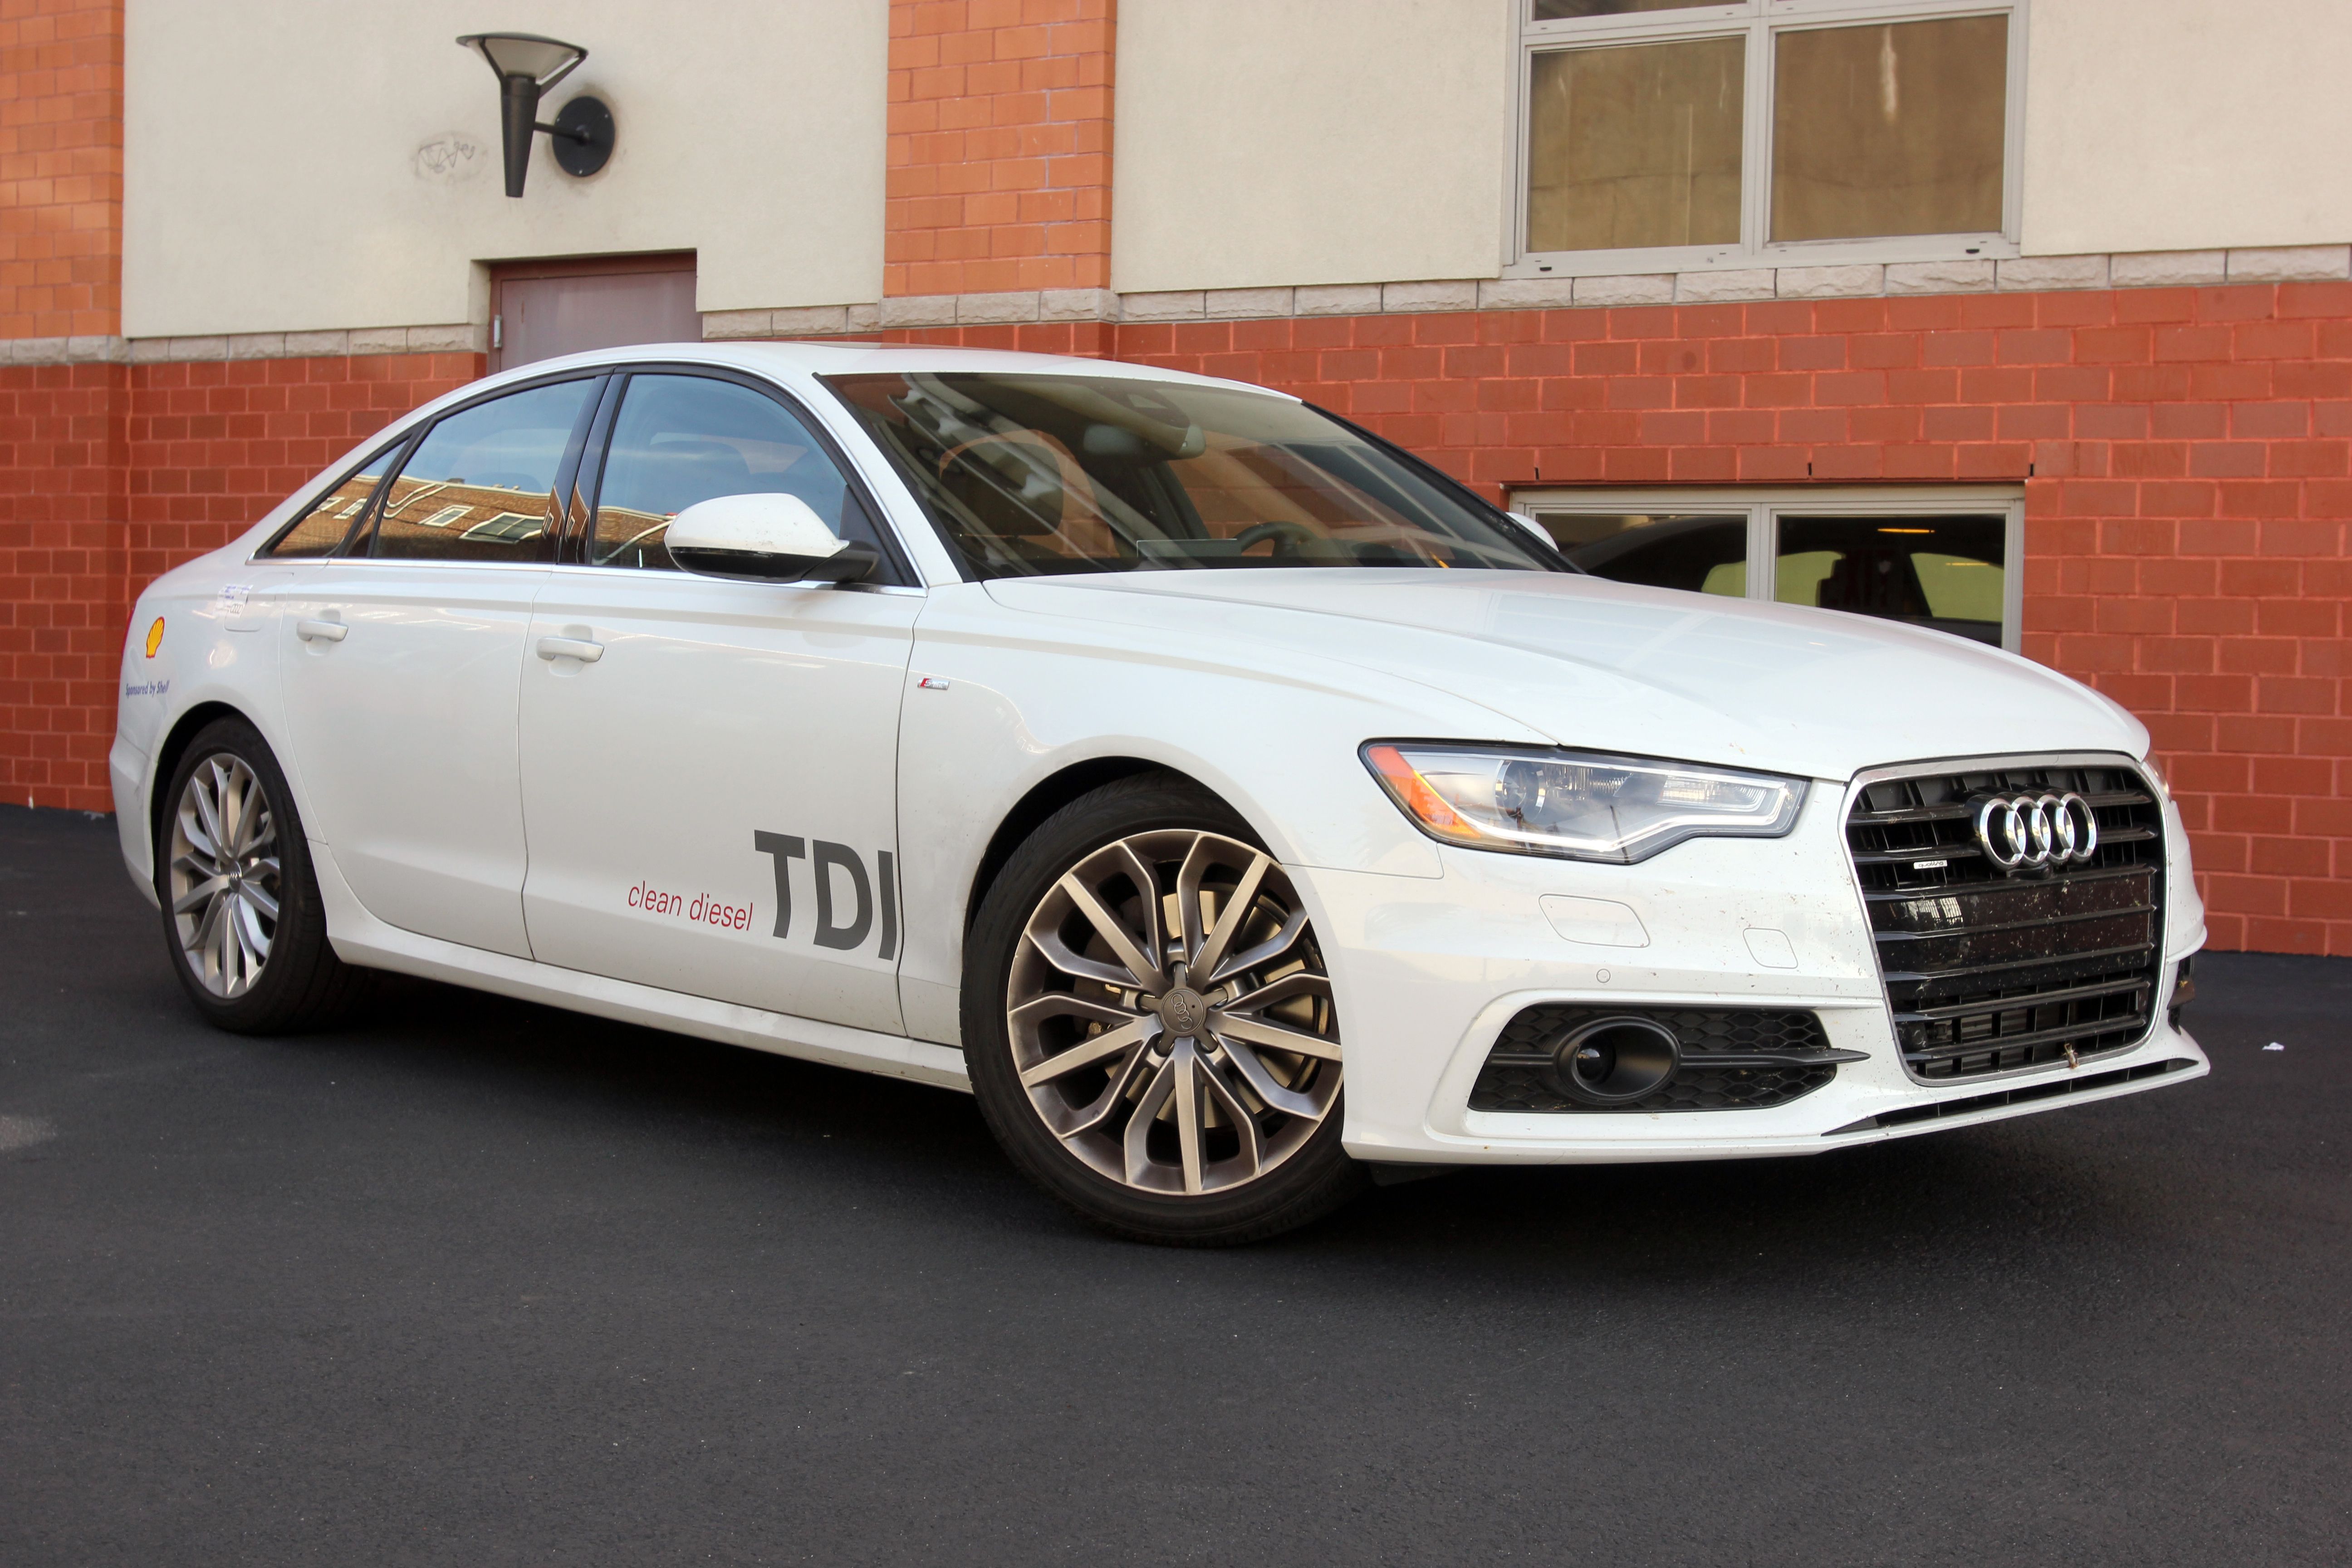 Car Review: Audi's new A6 combines tech and comfort to move up among luxury  sedans - WTOP News